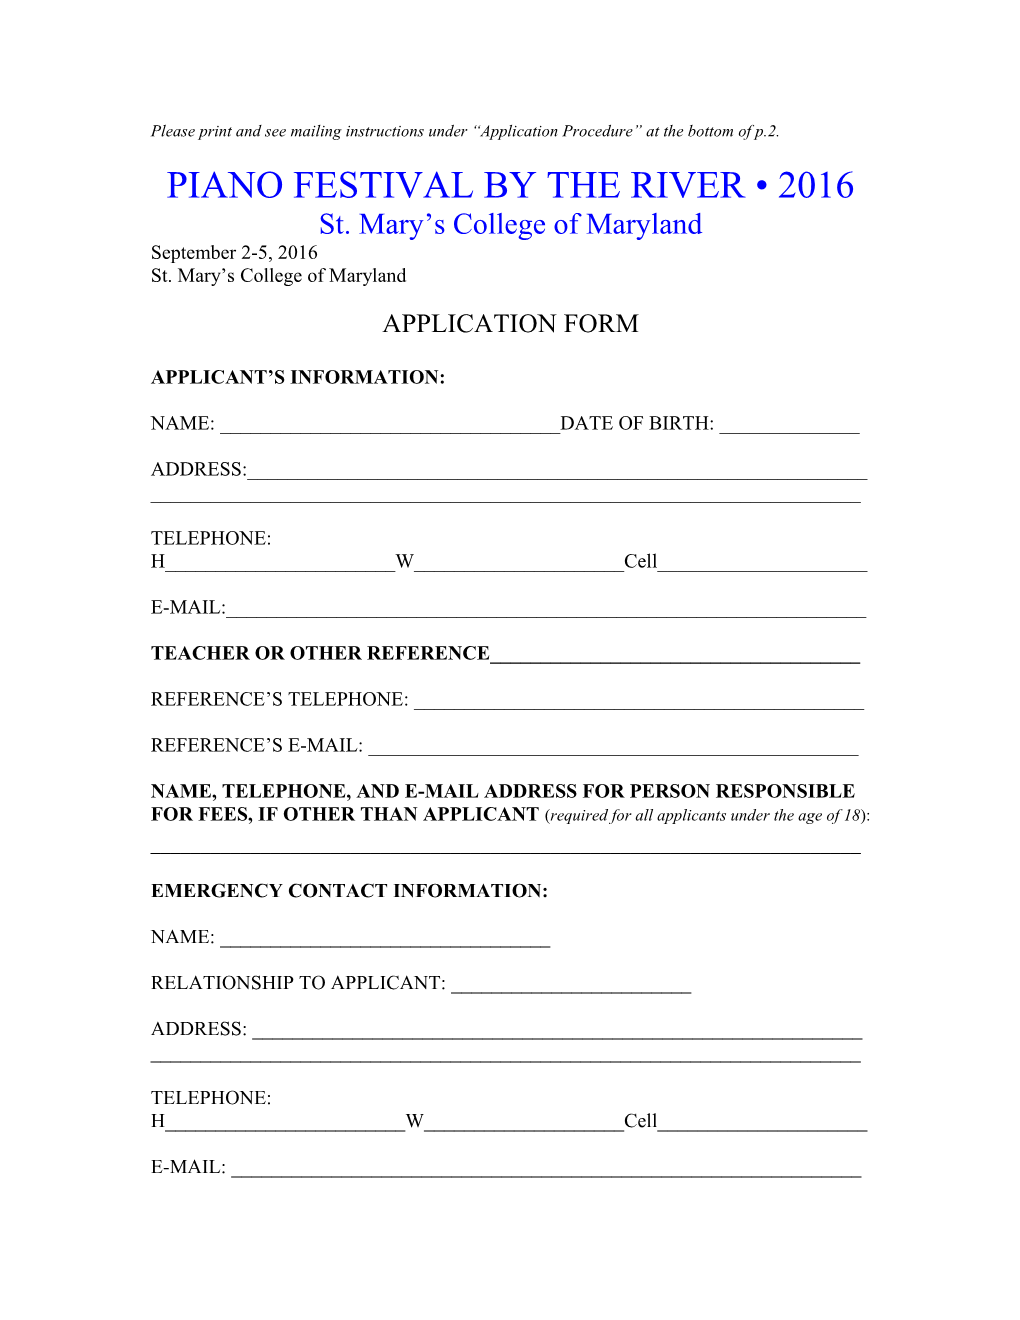 Please Print and See Mailing Instructions Under Application Procedure at the Bottom of P.2